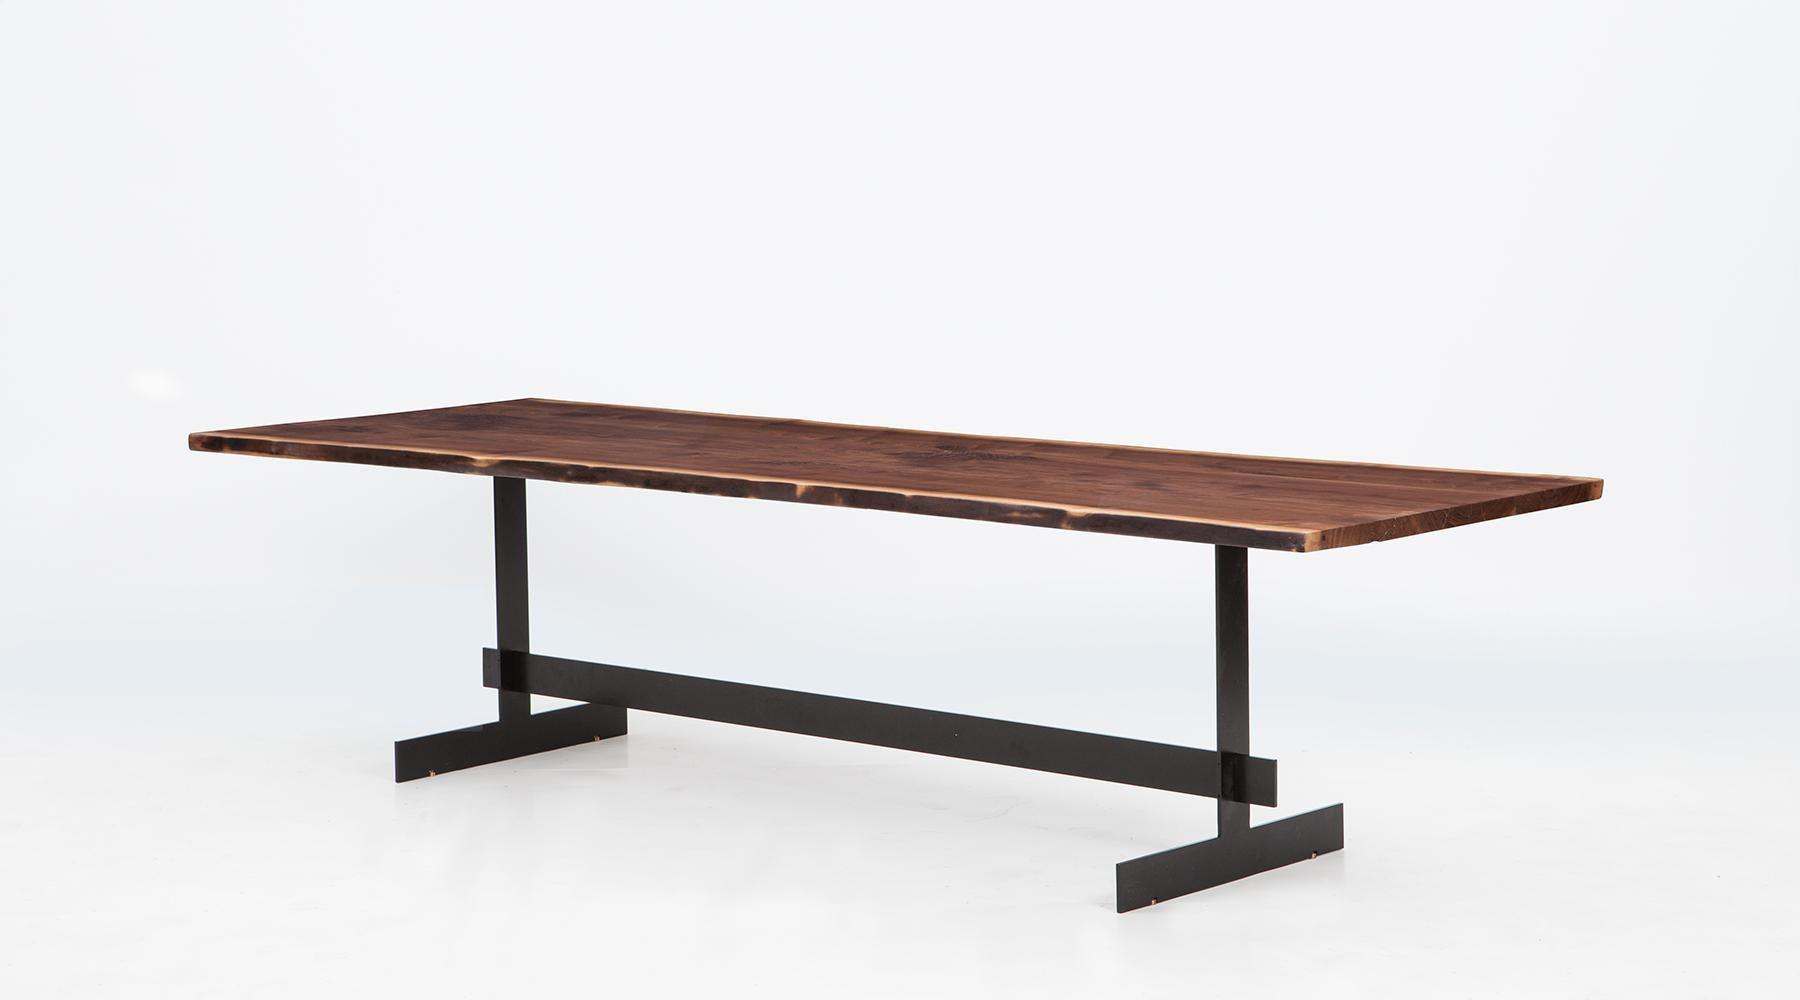 Table by contemporary German artist Johannes Hock. Massive walnut top on massive black lacquered metal base. Manufactured by Atelier Johannes Hock.

The shape is Inspired by an originally monastery table consisting of trestle and plate. Live edge